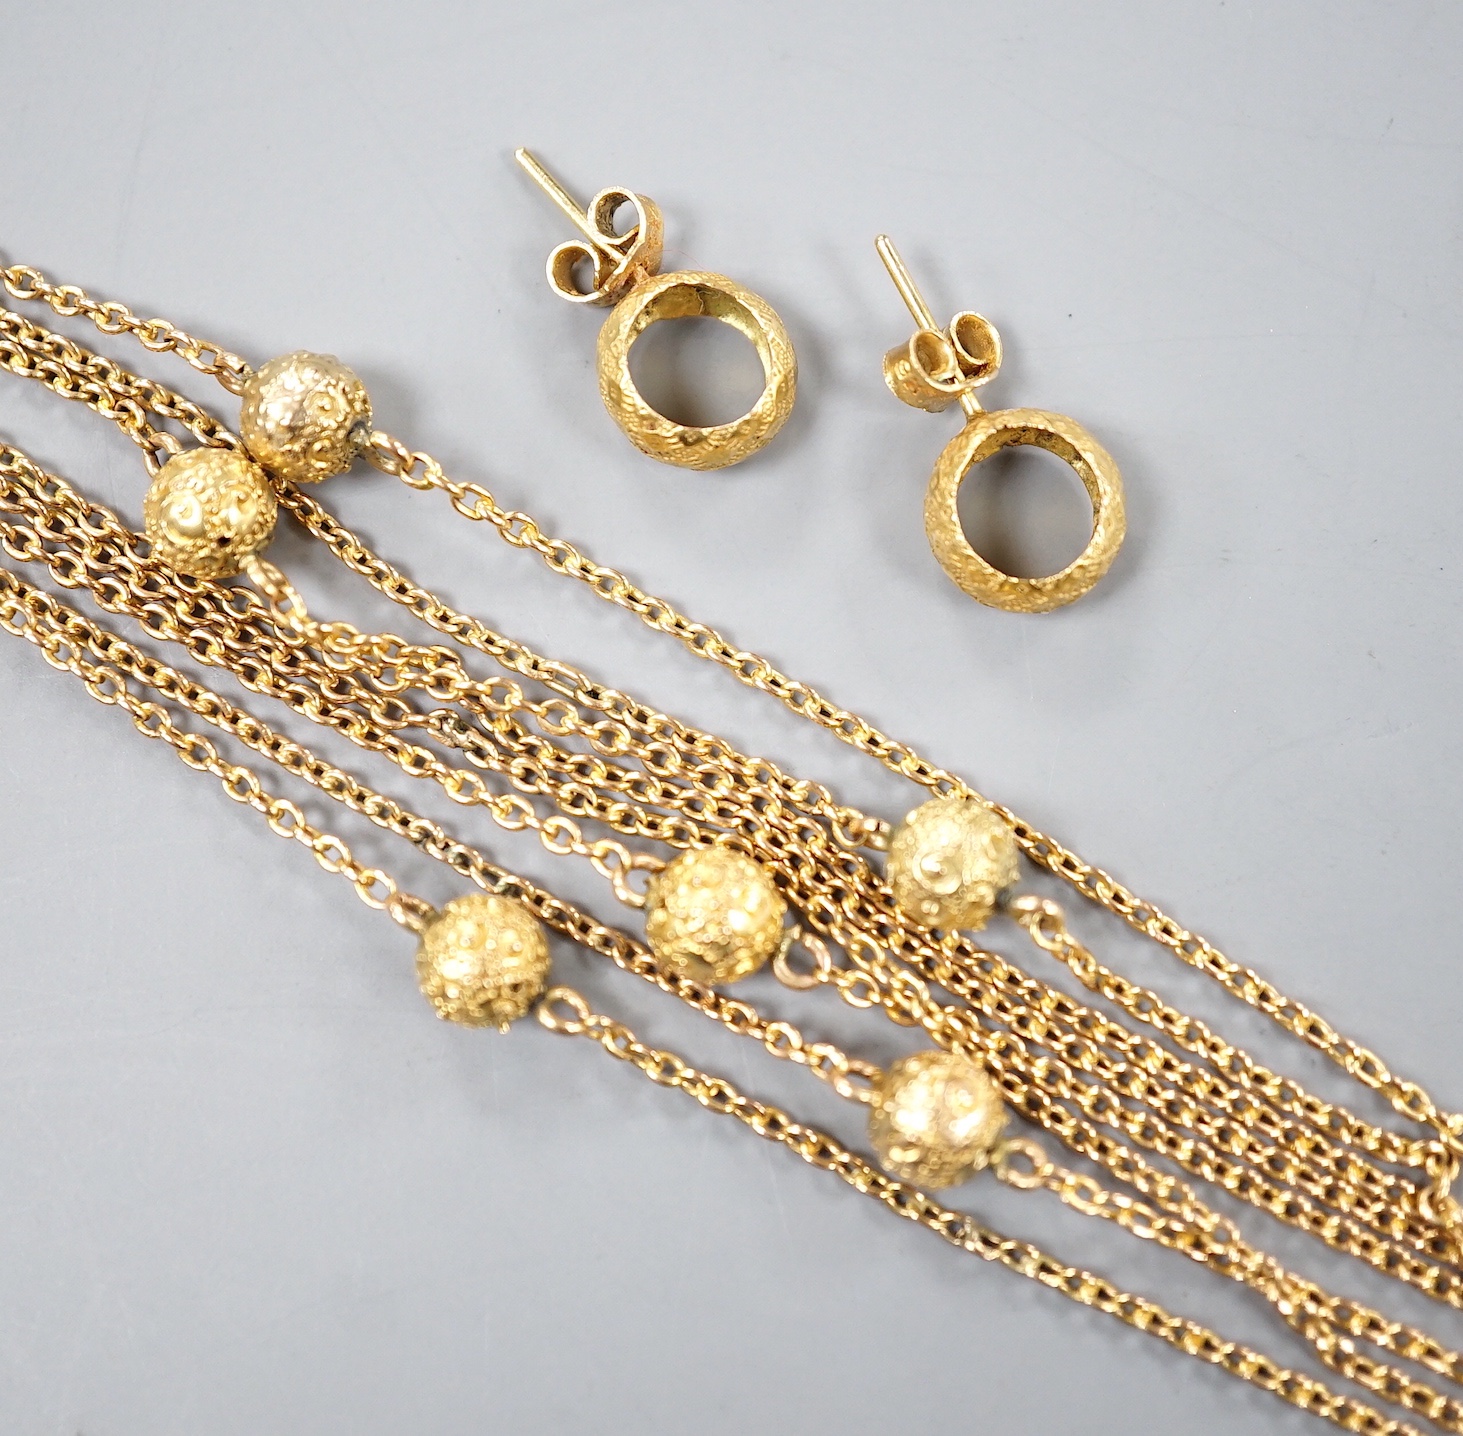 A 9ct guard chain with spherical spacers and a pair of 9k earrings, 11.7 grams.